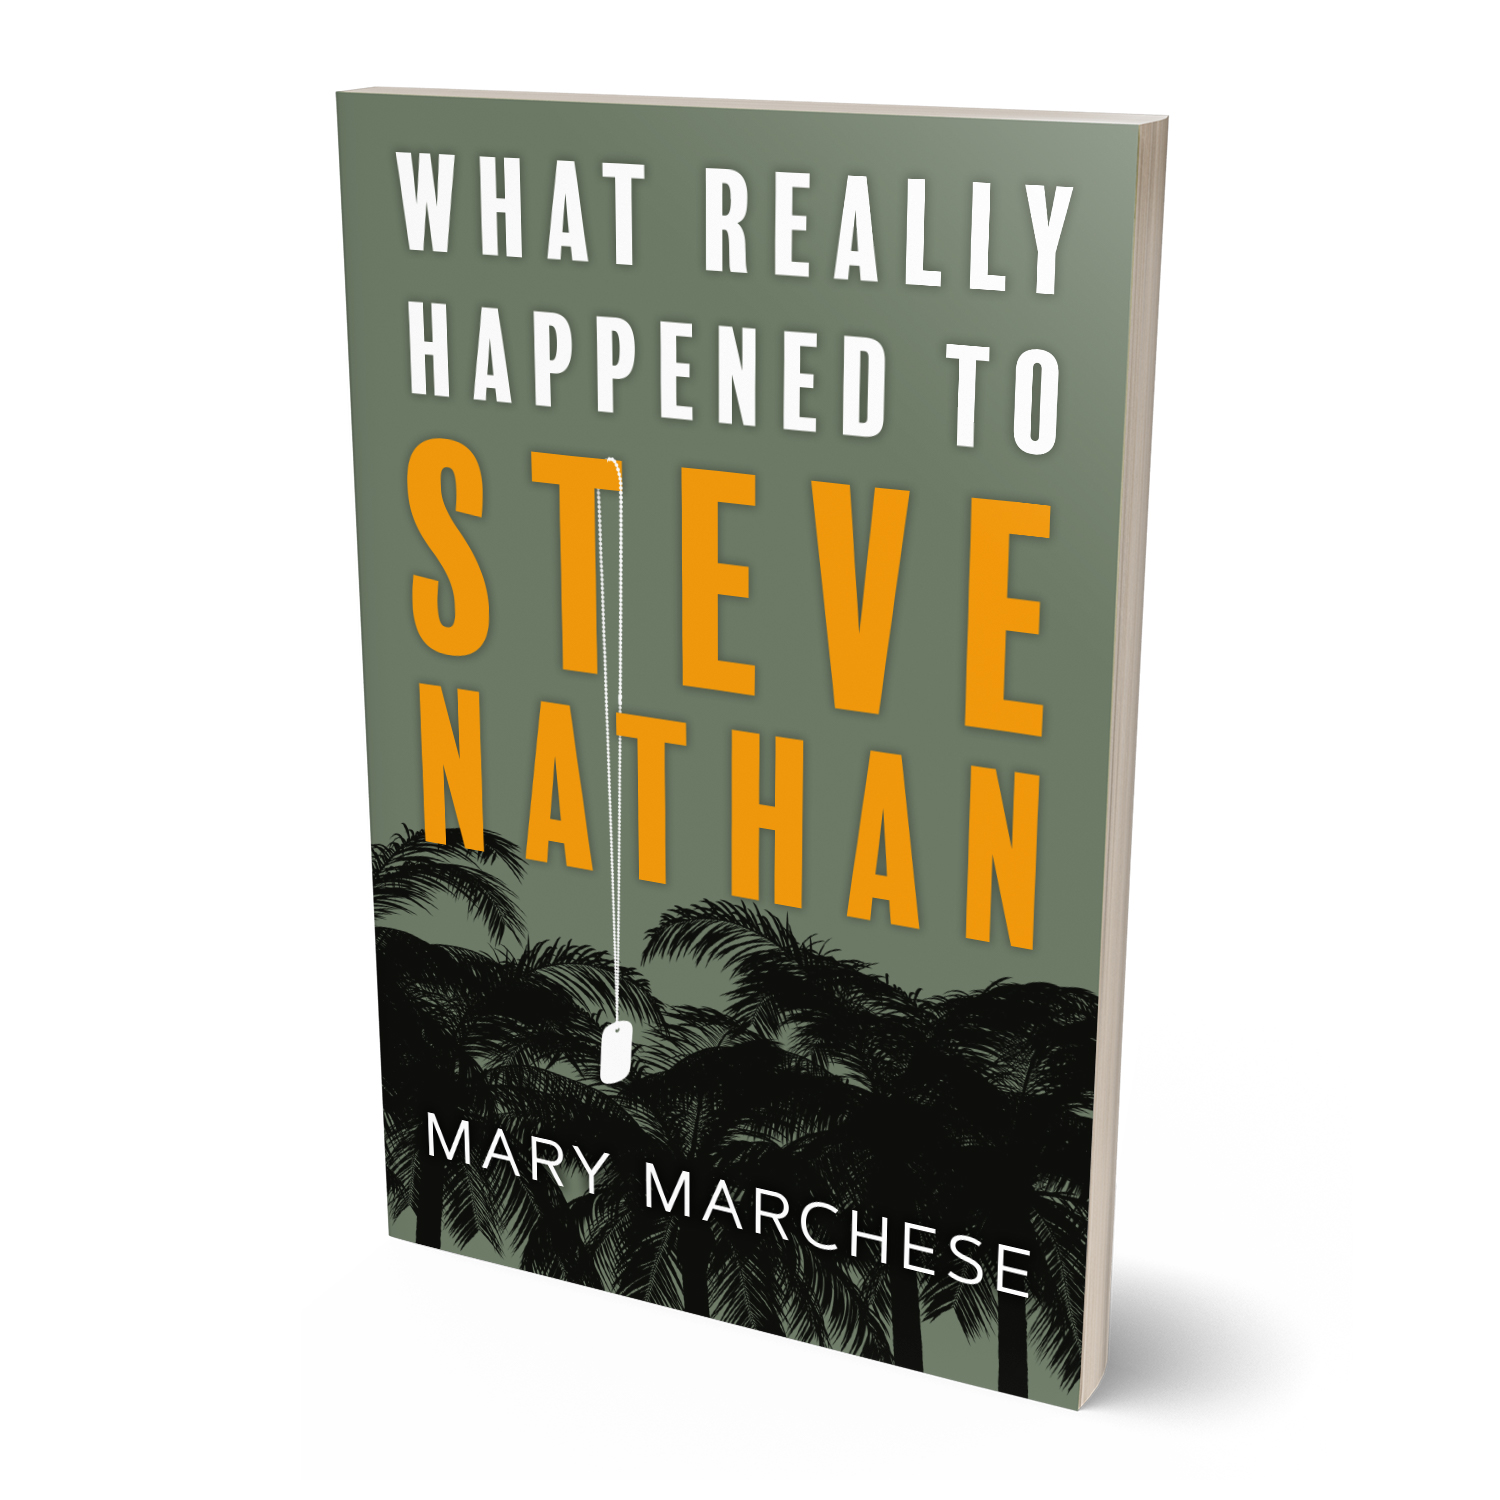 'What Really Happened To Steve Nathan' is a telling family mystery, set against the backdrop of the Vietnam War, by Mary Marchese. The book cover and interior were designed by Mark Thomas, of coverness.com. To find out more about my book design services, please visit www.coverness.com.